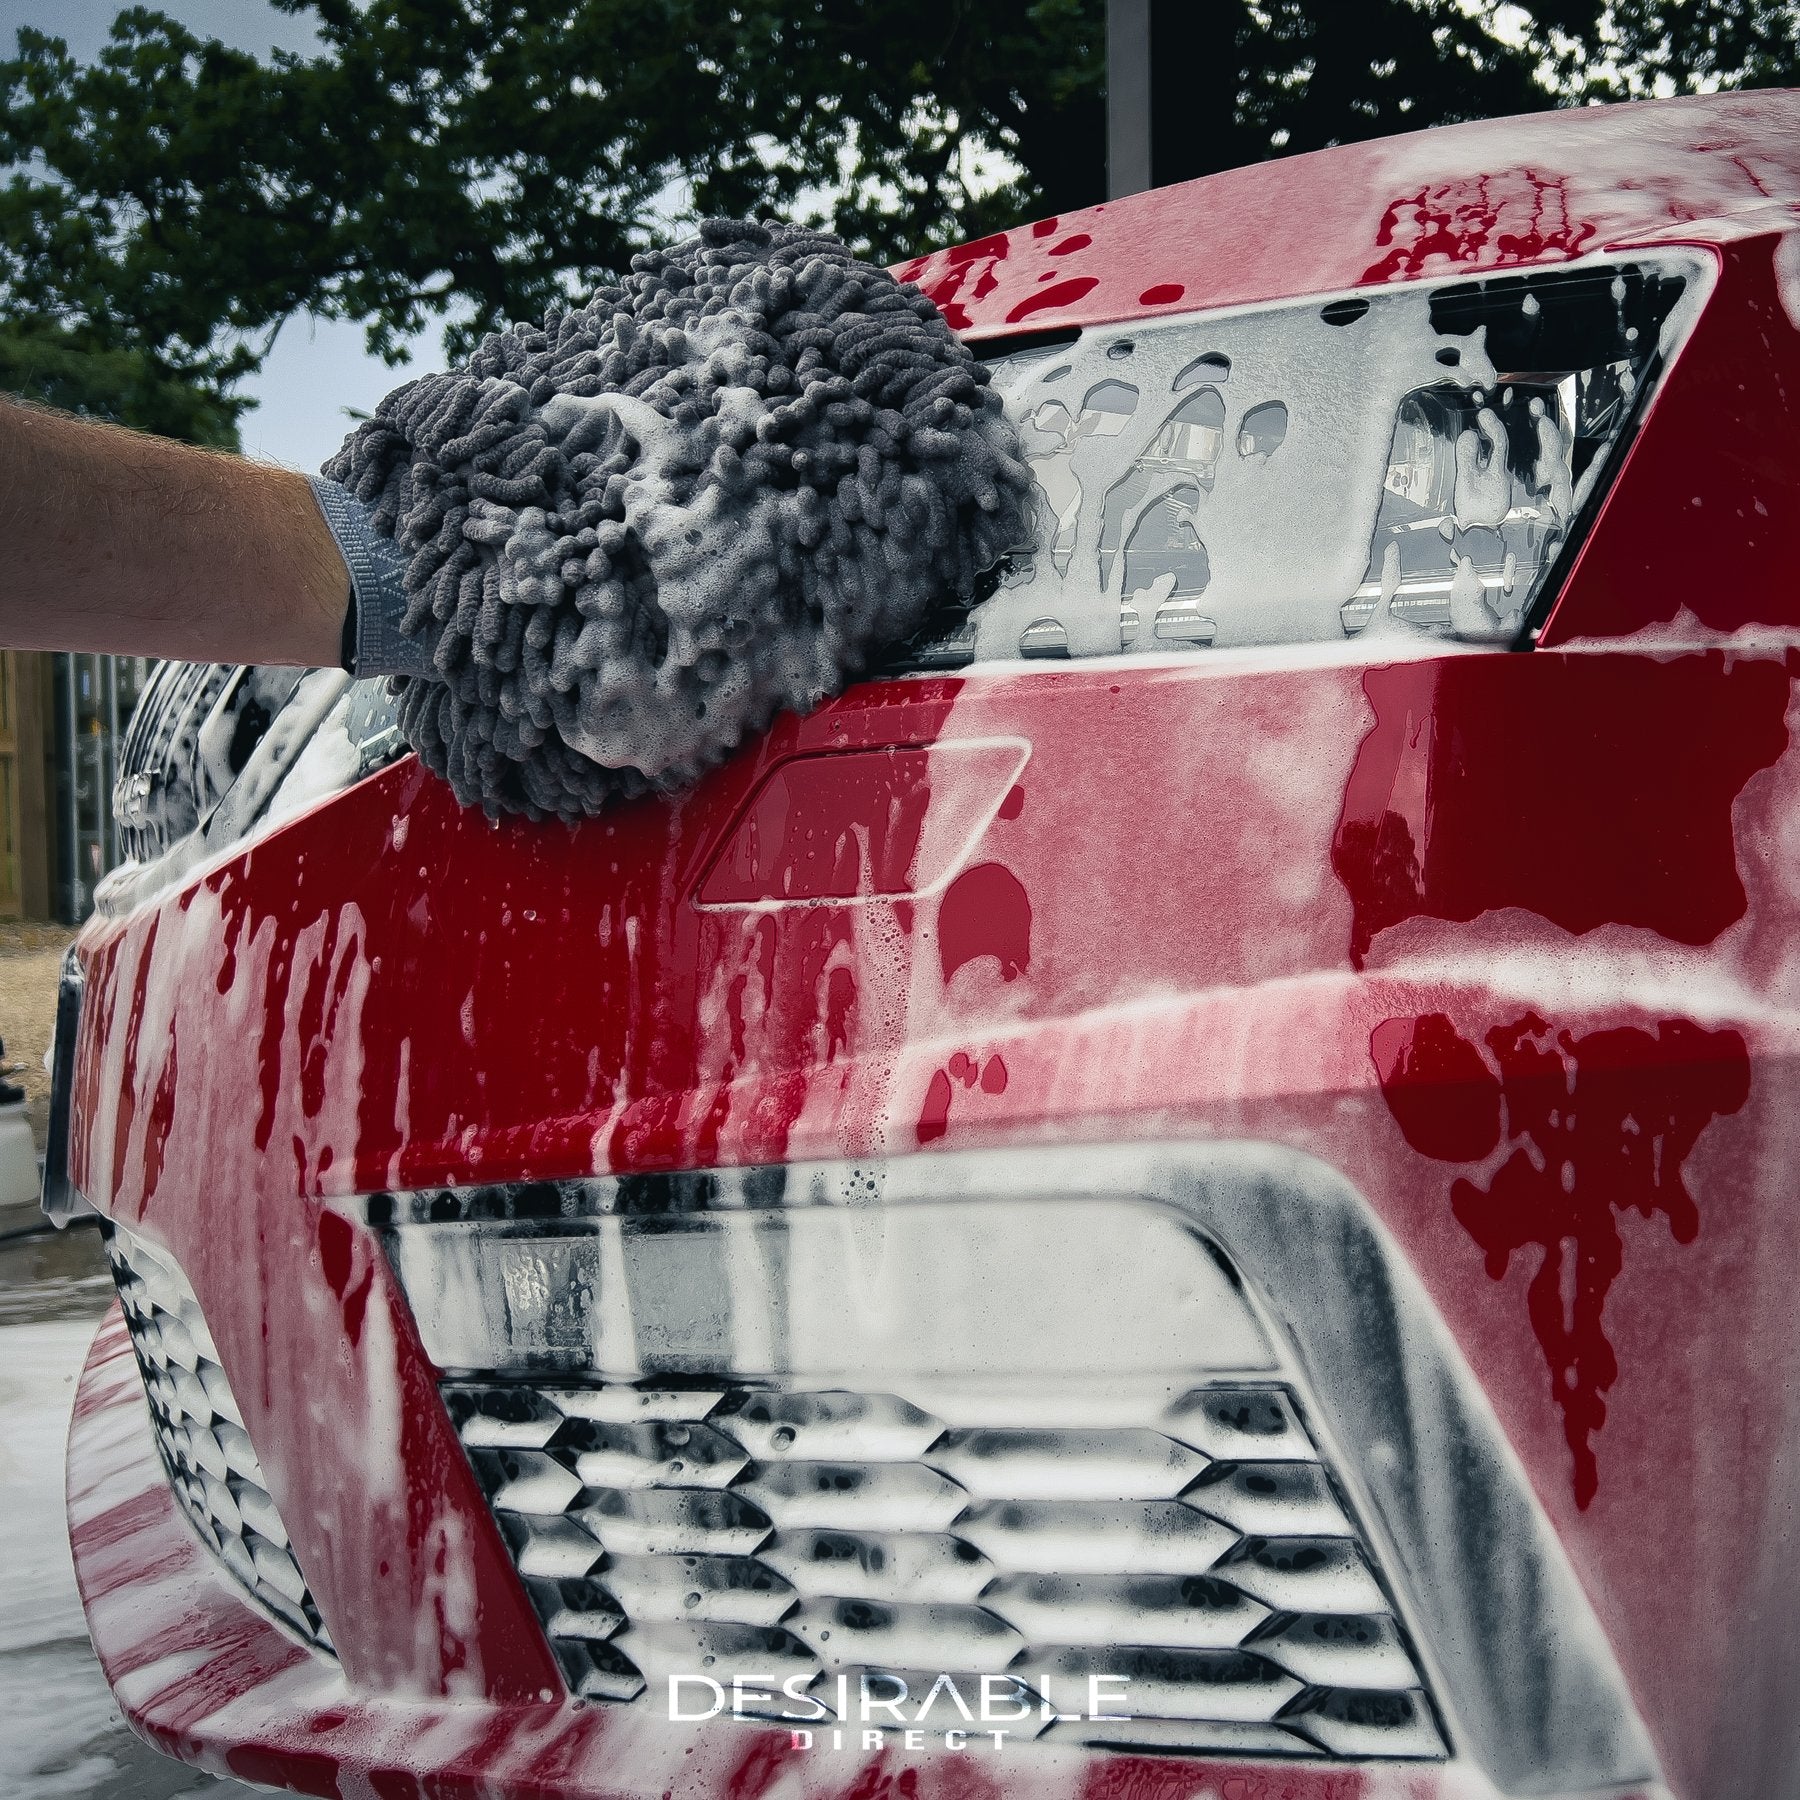 Car care noodle chenille grey wash mitt cleaning the front of a red car covered in car shampoo.